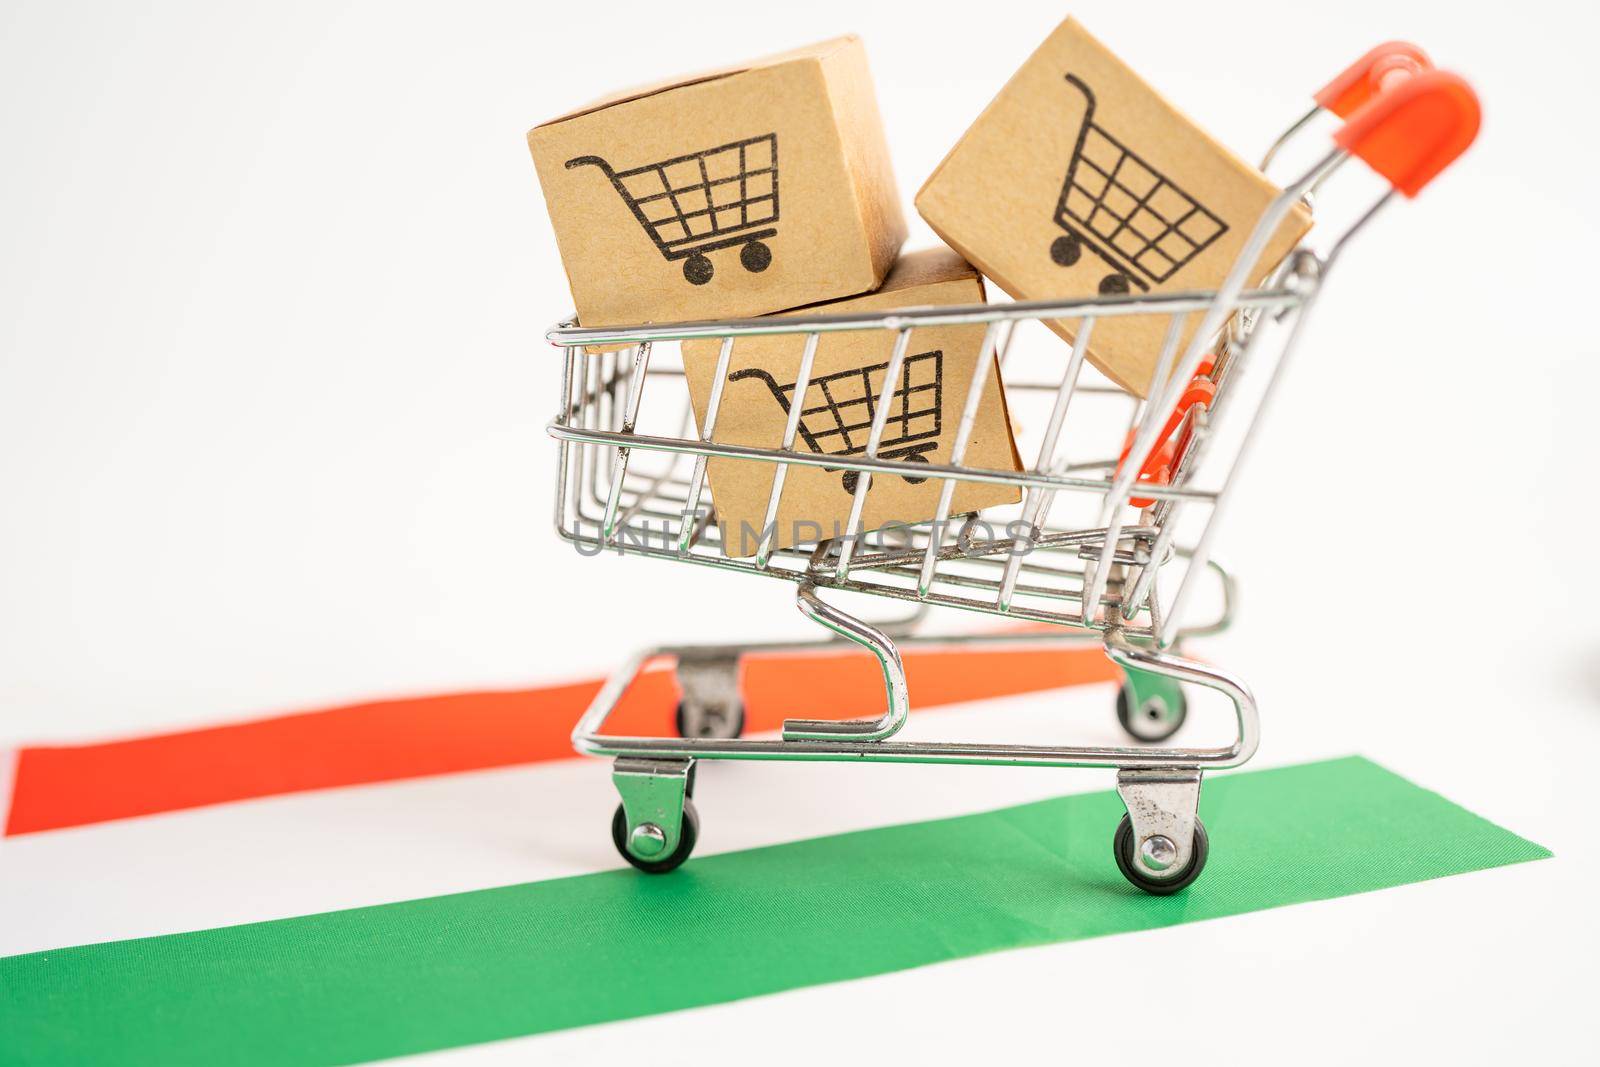 Box with shopping cart logo and Hungary flag, Import Export Shopping online or eCommerce finance delivery service store product shipping, trade, supplier concept.